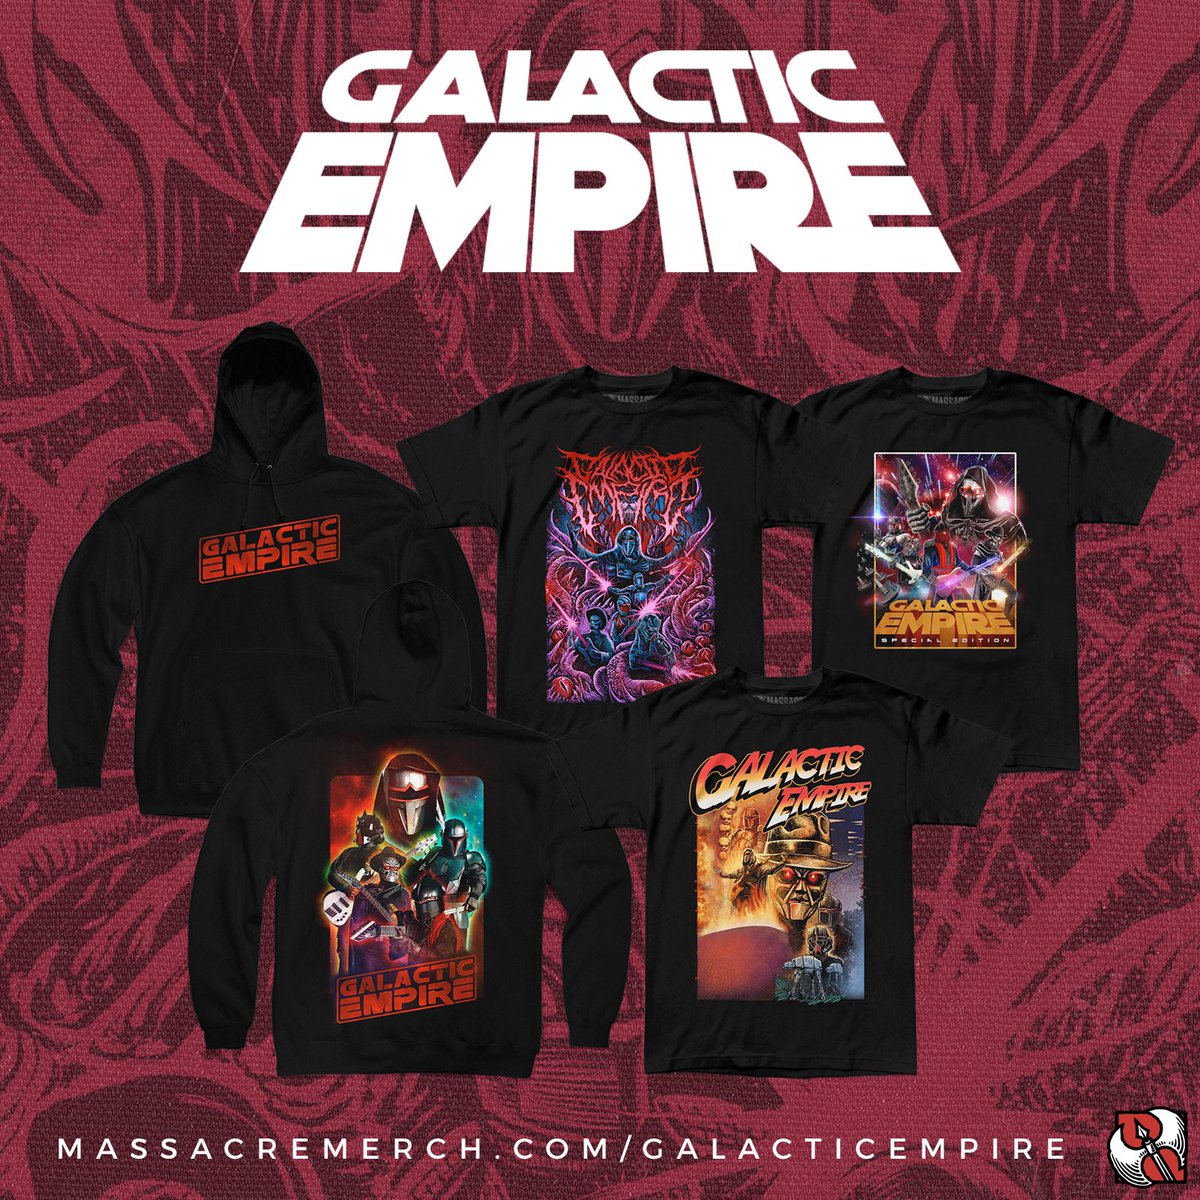 NEW MERCH DROP - 3 BRAND NEW online exclusives available NOW only in our webstore! #merchdrop #starwars #galacticempire #ashoka #metal #tour